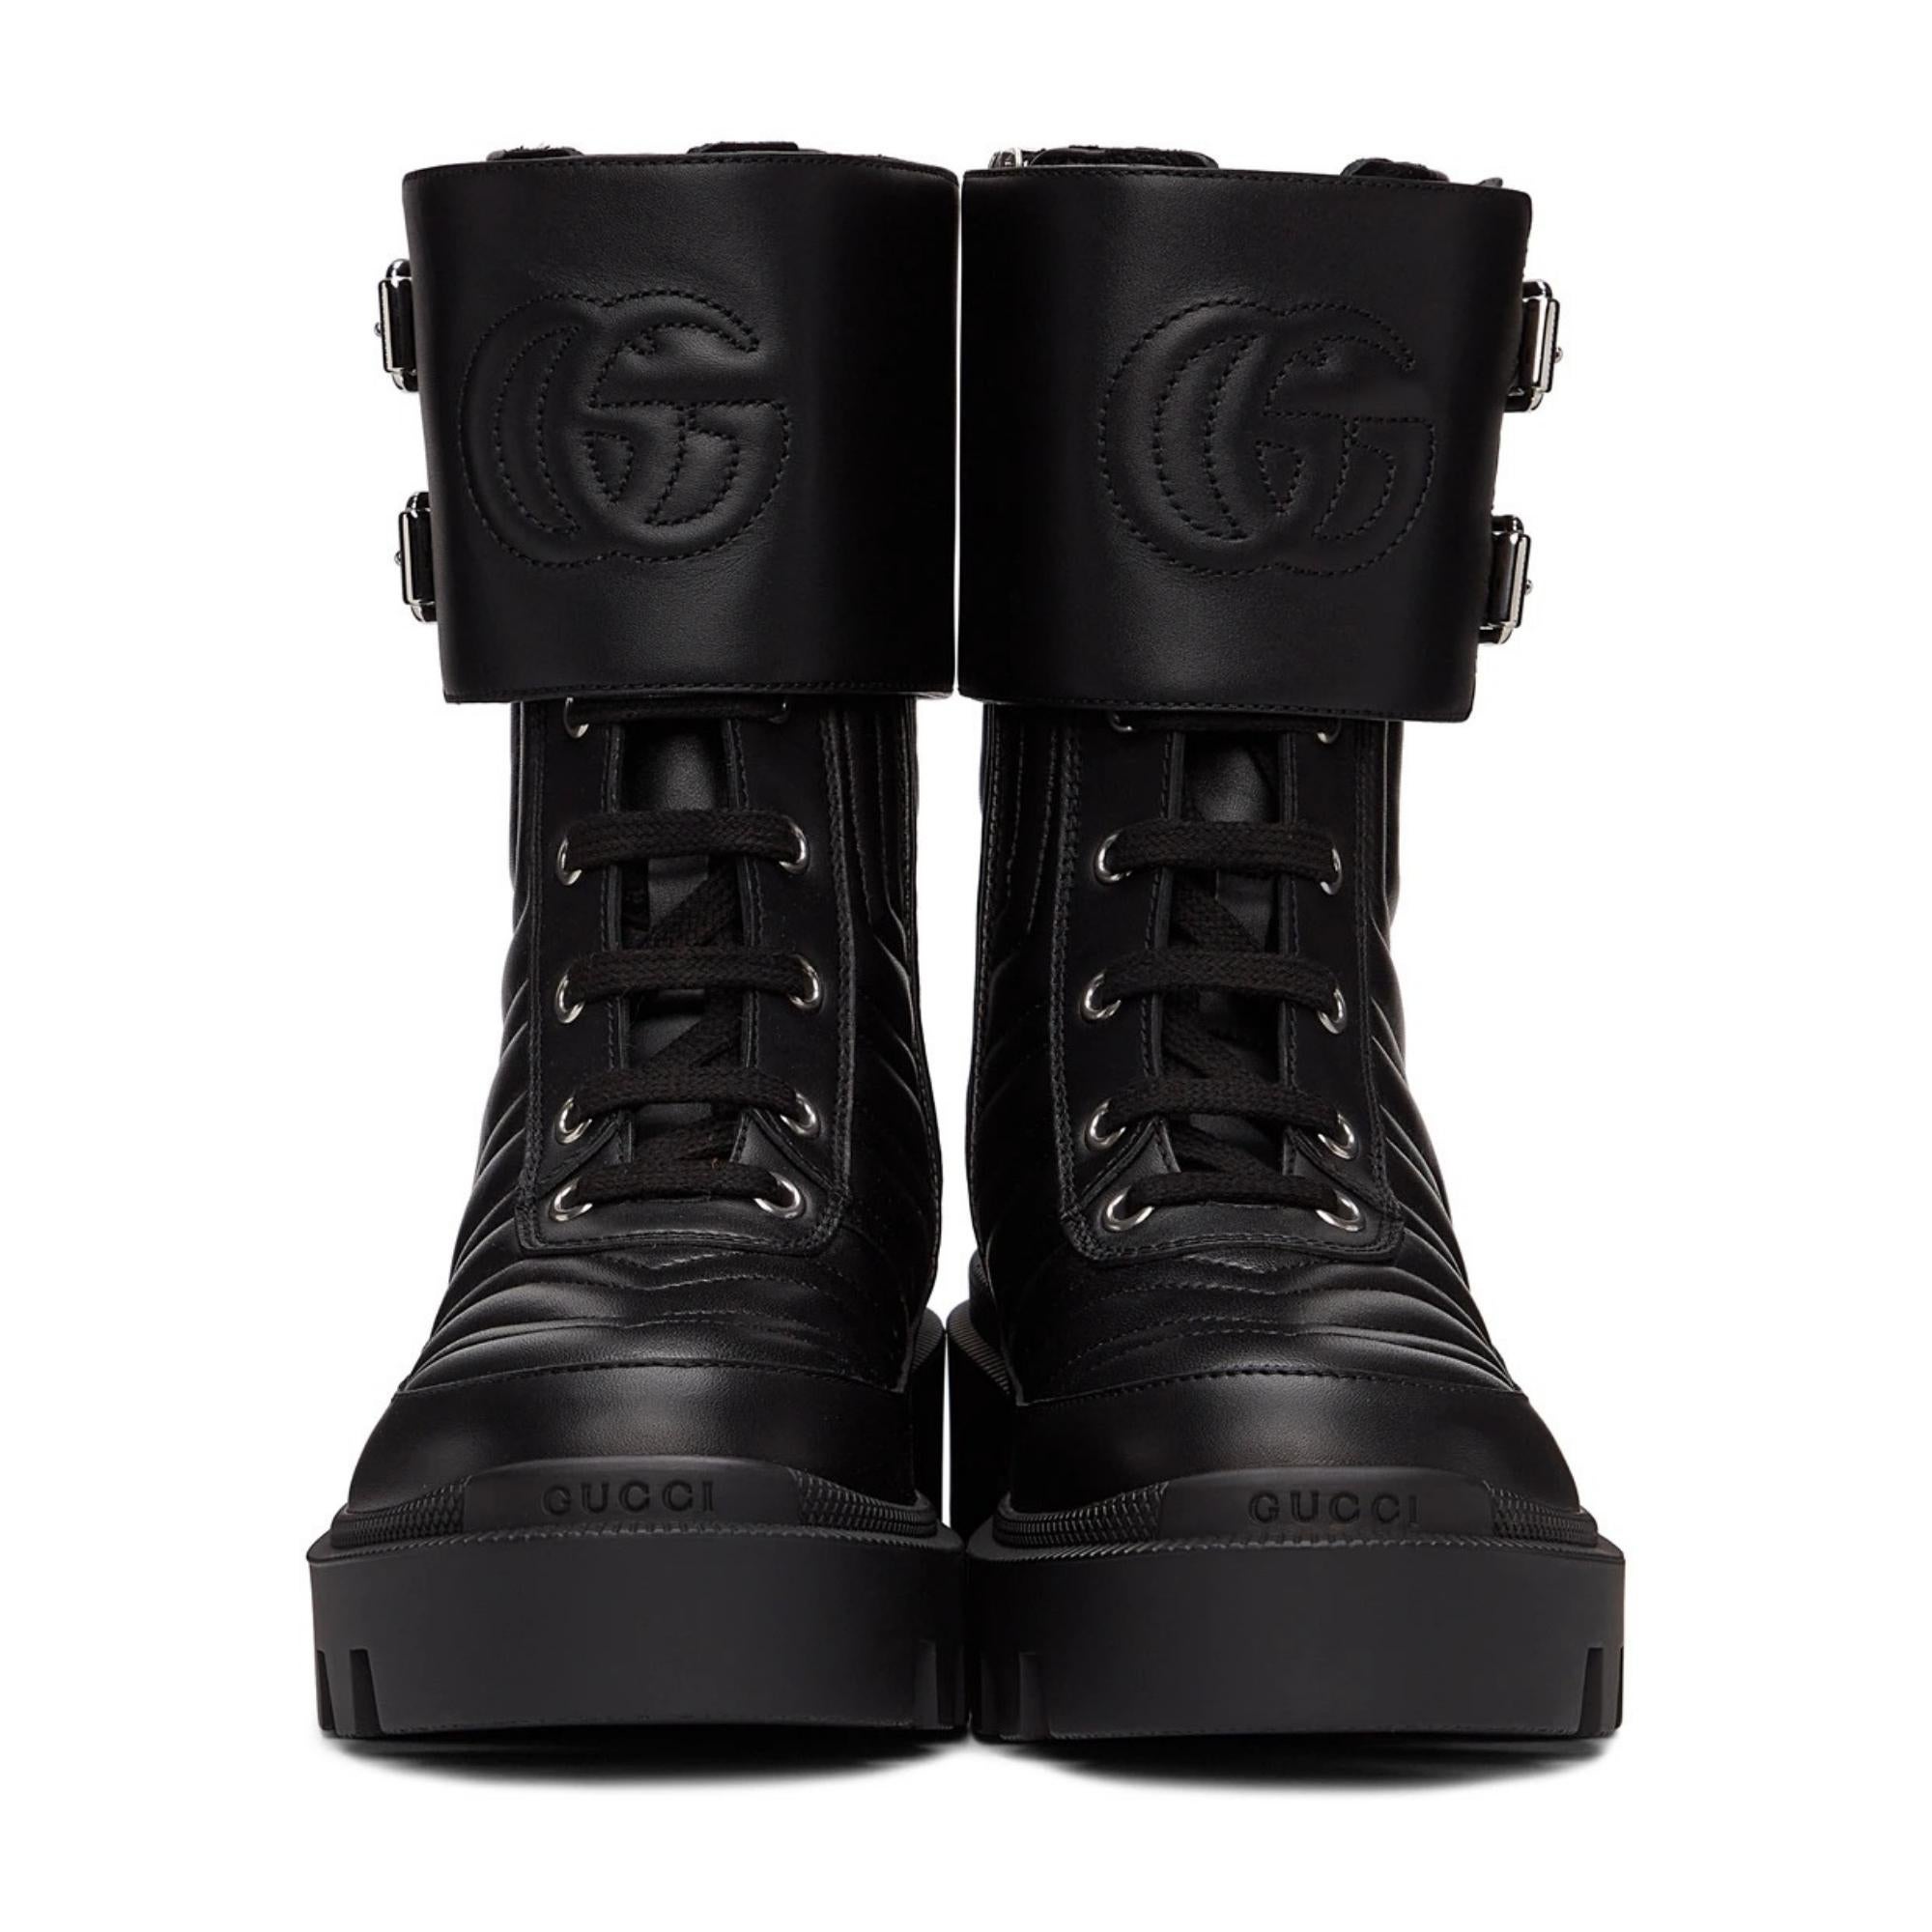 Ankle-high quilted buffed leather boots in black. Logo embossed at round toe. Tonal lace-up closure. Adjustable pin-buckle strap featuring quilted logo at collar. Zip closure at inner size. Textured rubber platform midsole. Treaded rubber outsole.